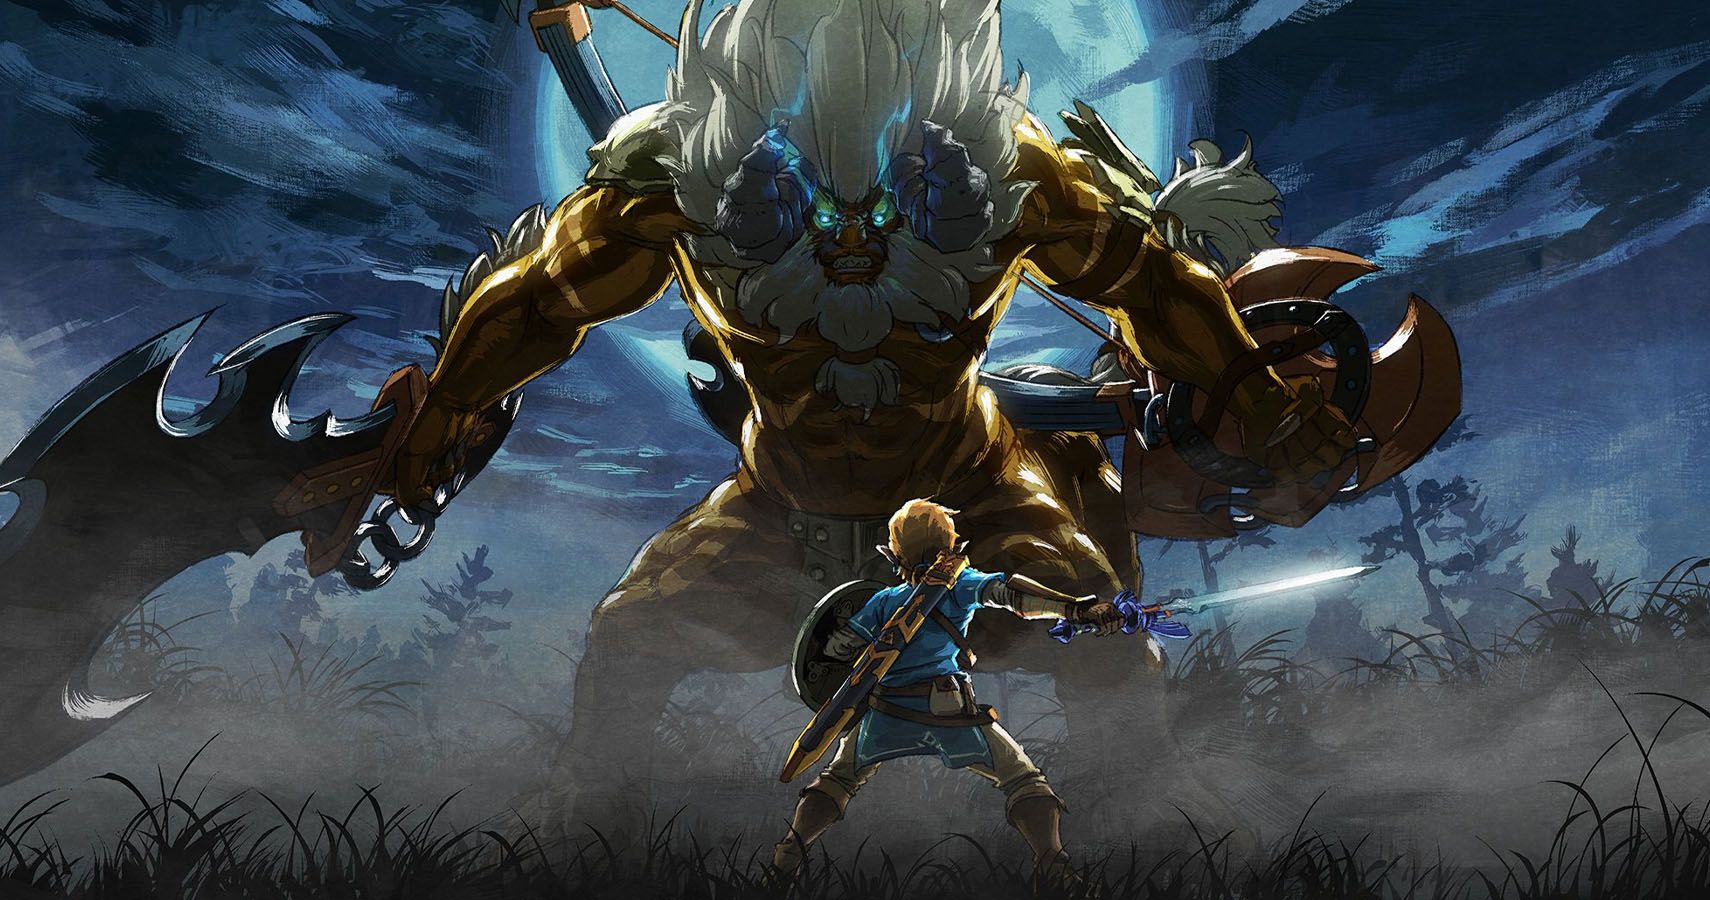 Breath Of The Wild: How To Find & Defeat A Lynel